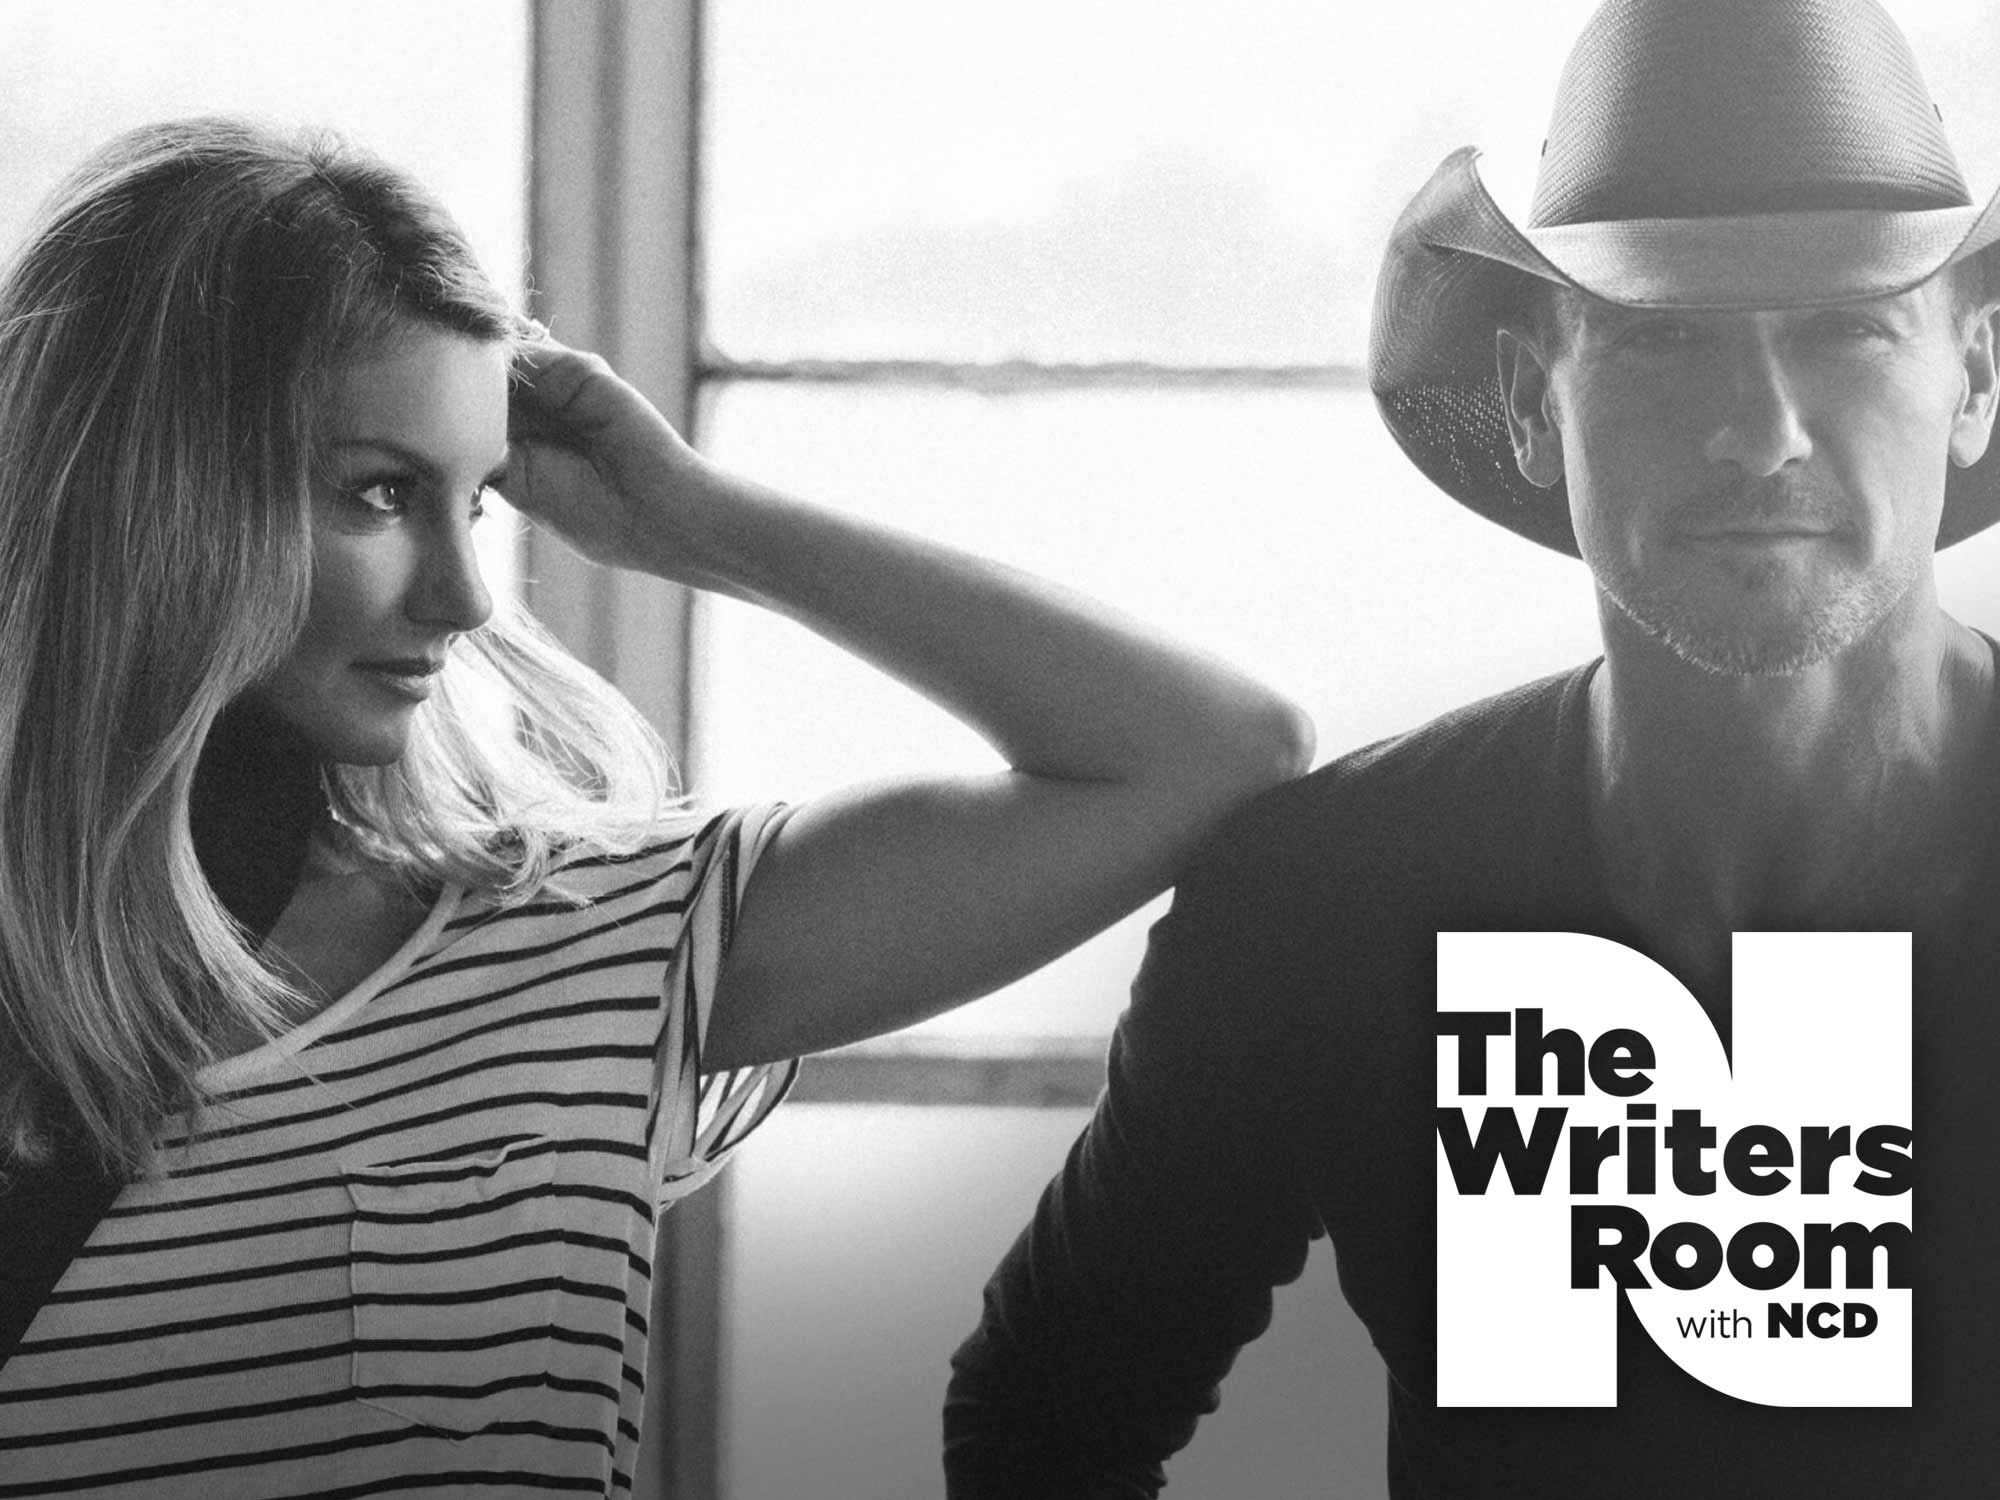 Tim McGraw and Faith Hill Talk About Their New Duet, “Speak to a Girl,” Who Wears The Pants in the Family and the Best Thing About Being on the Soul2Soul Tour Together